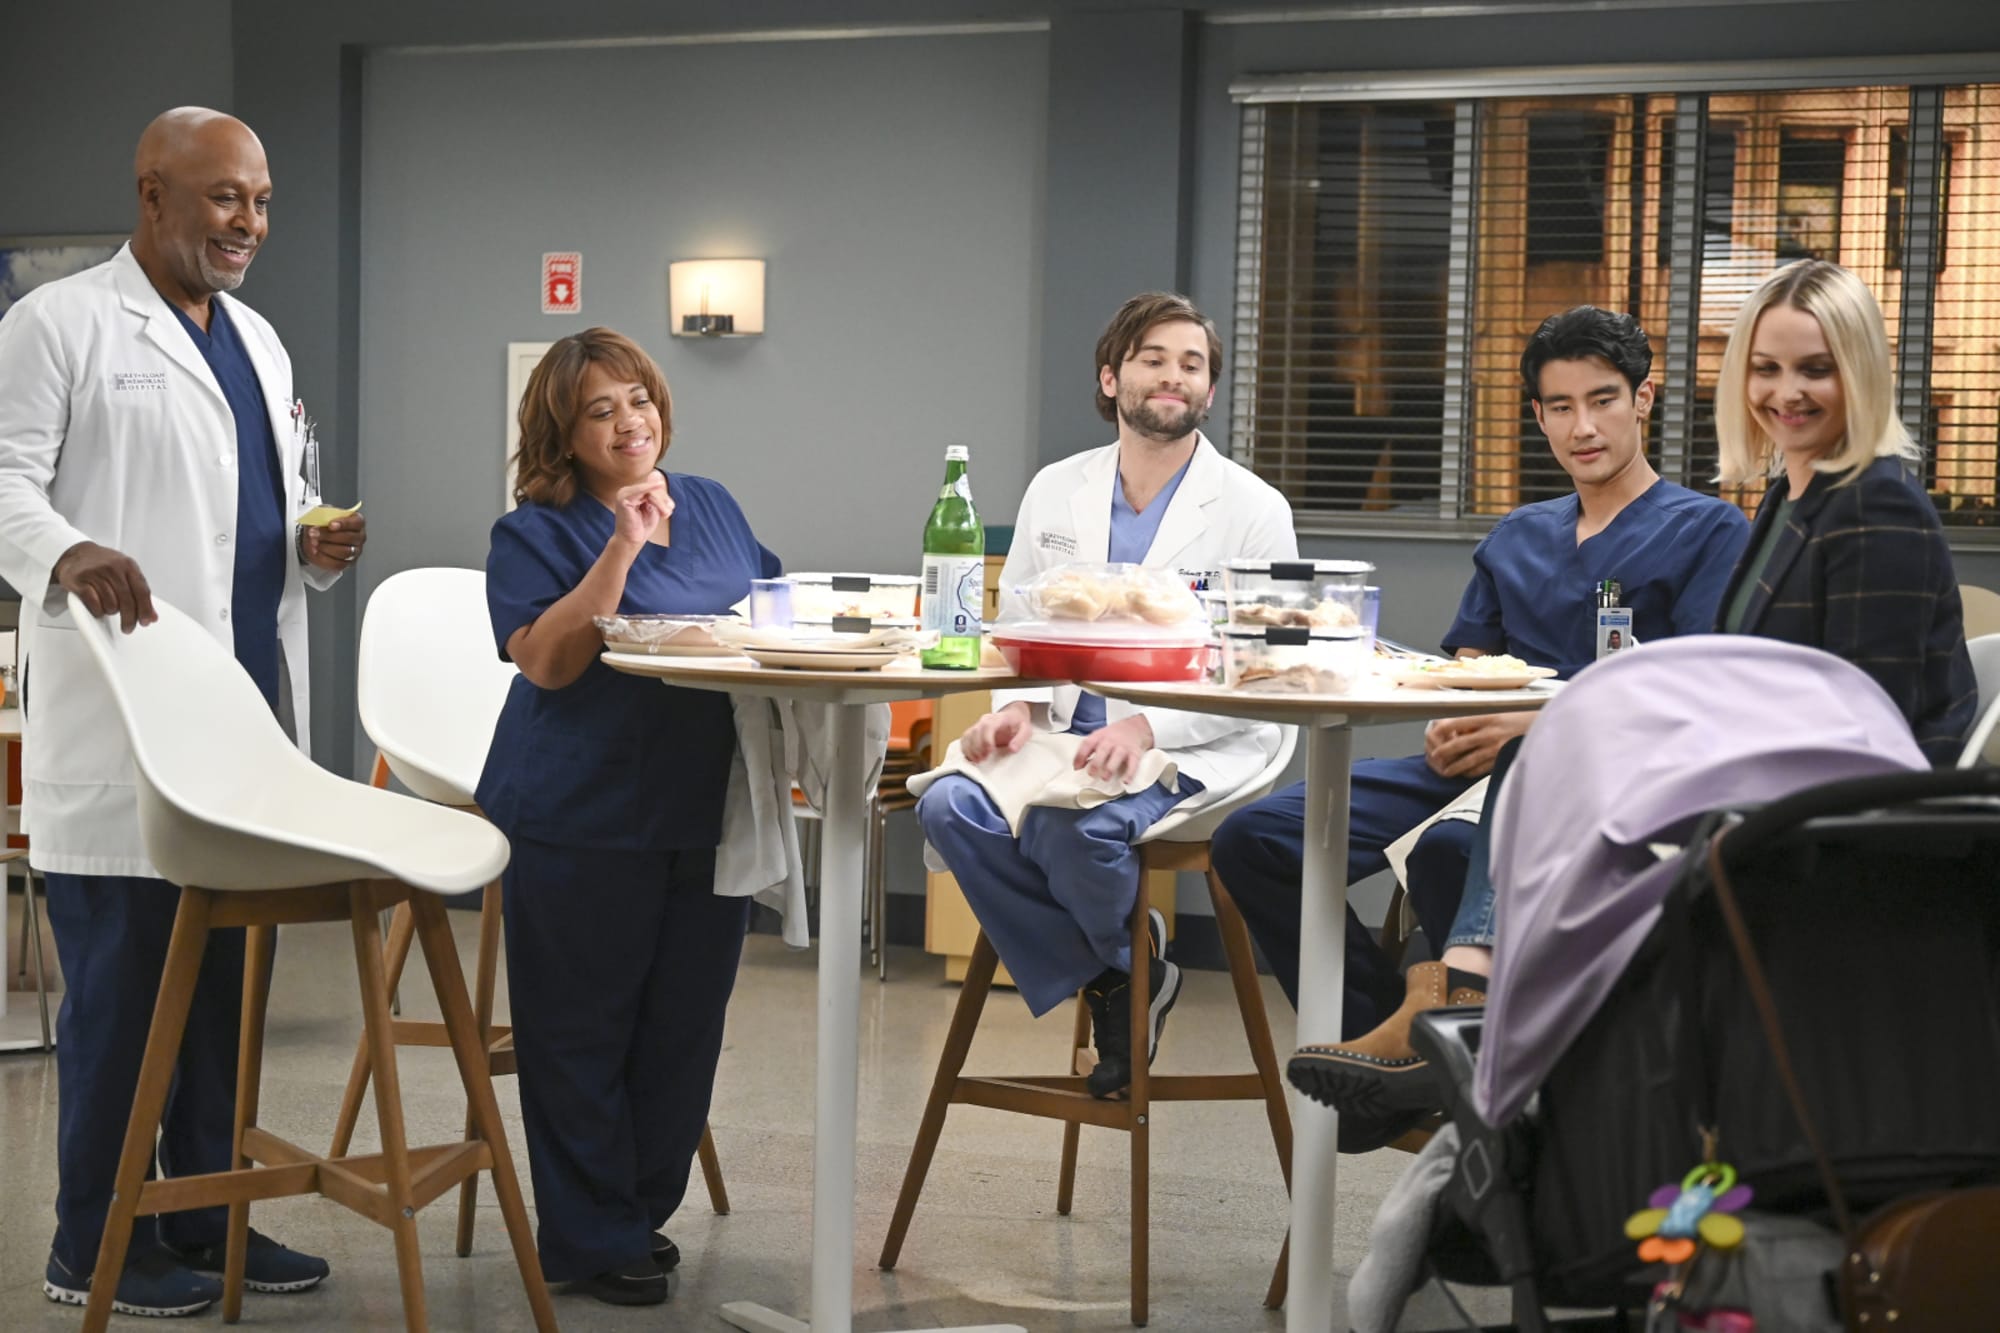 Grey's Anatomy officially renewed for season 19 at ABC